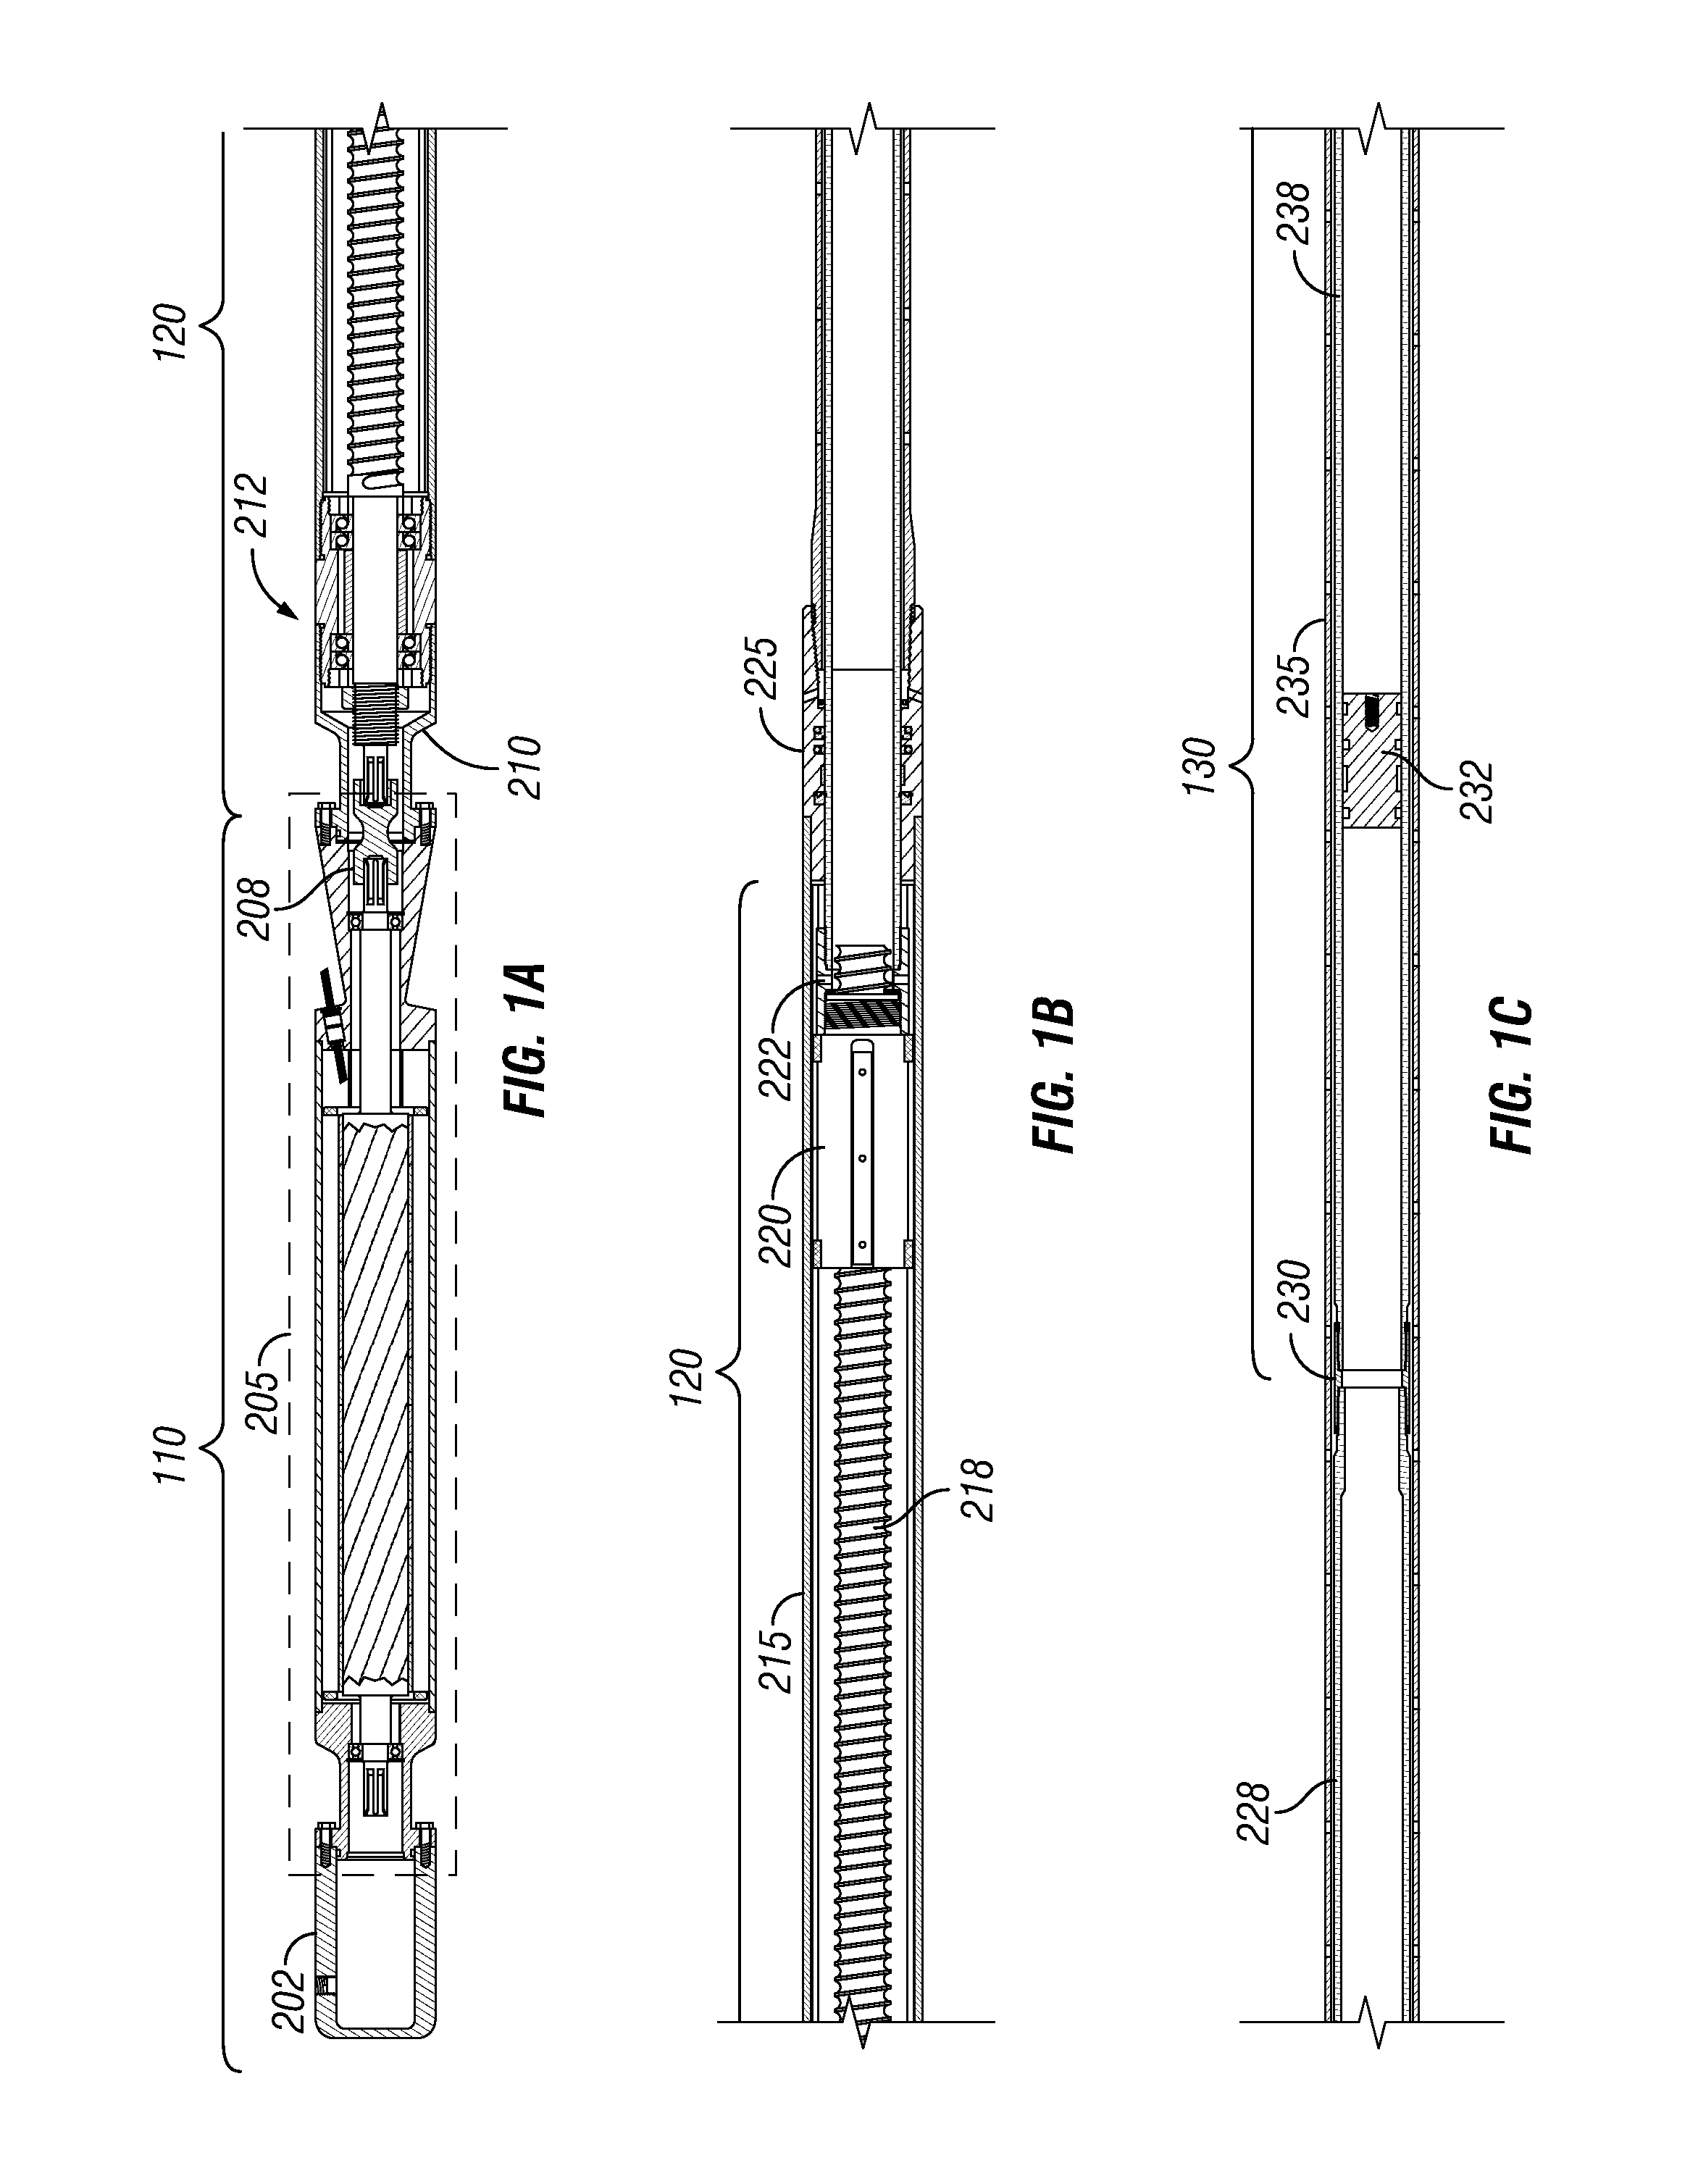 Linear pump and motor systems and methods